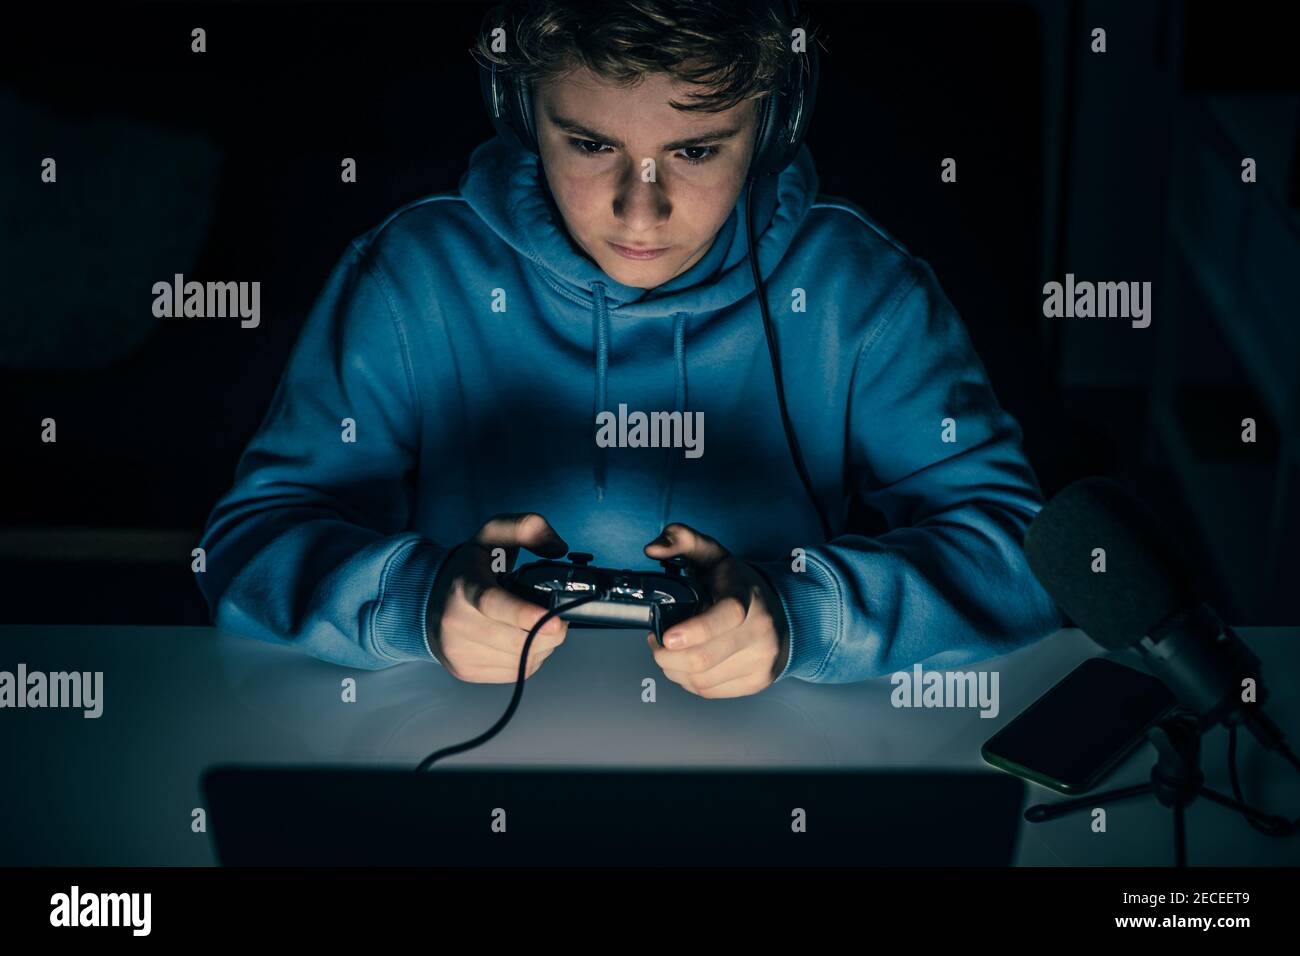 Young blogger and video game streamer playing at home with laptop. Vlogger filming himself having fun using technology to connect with audiences.Teena Stock Photo